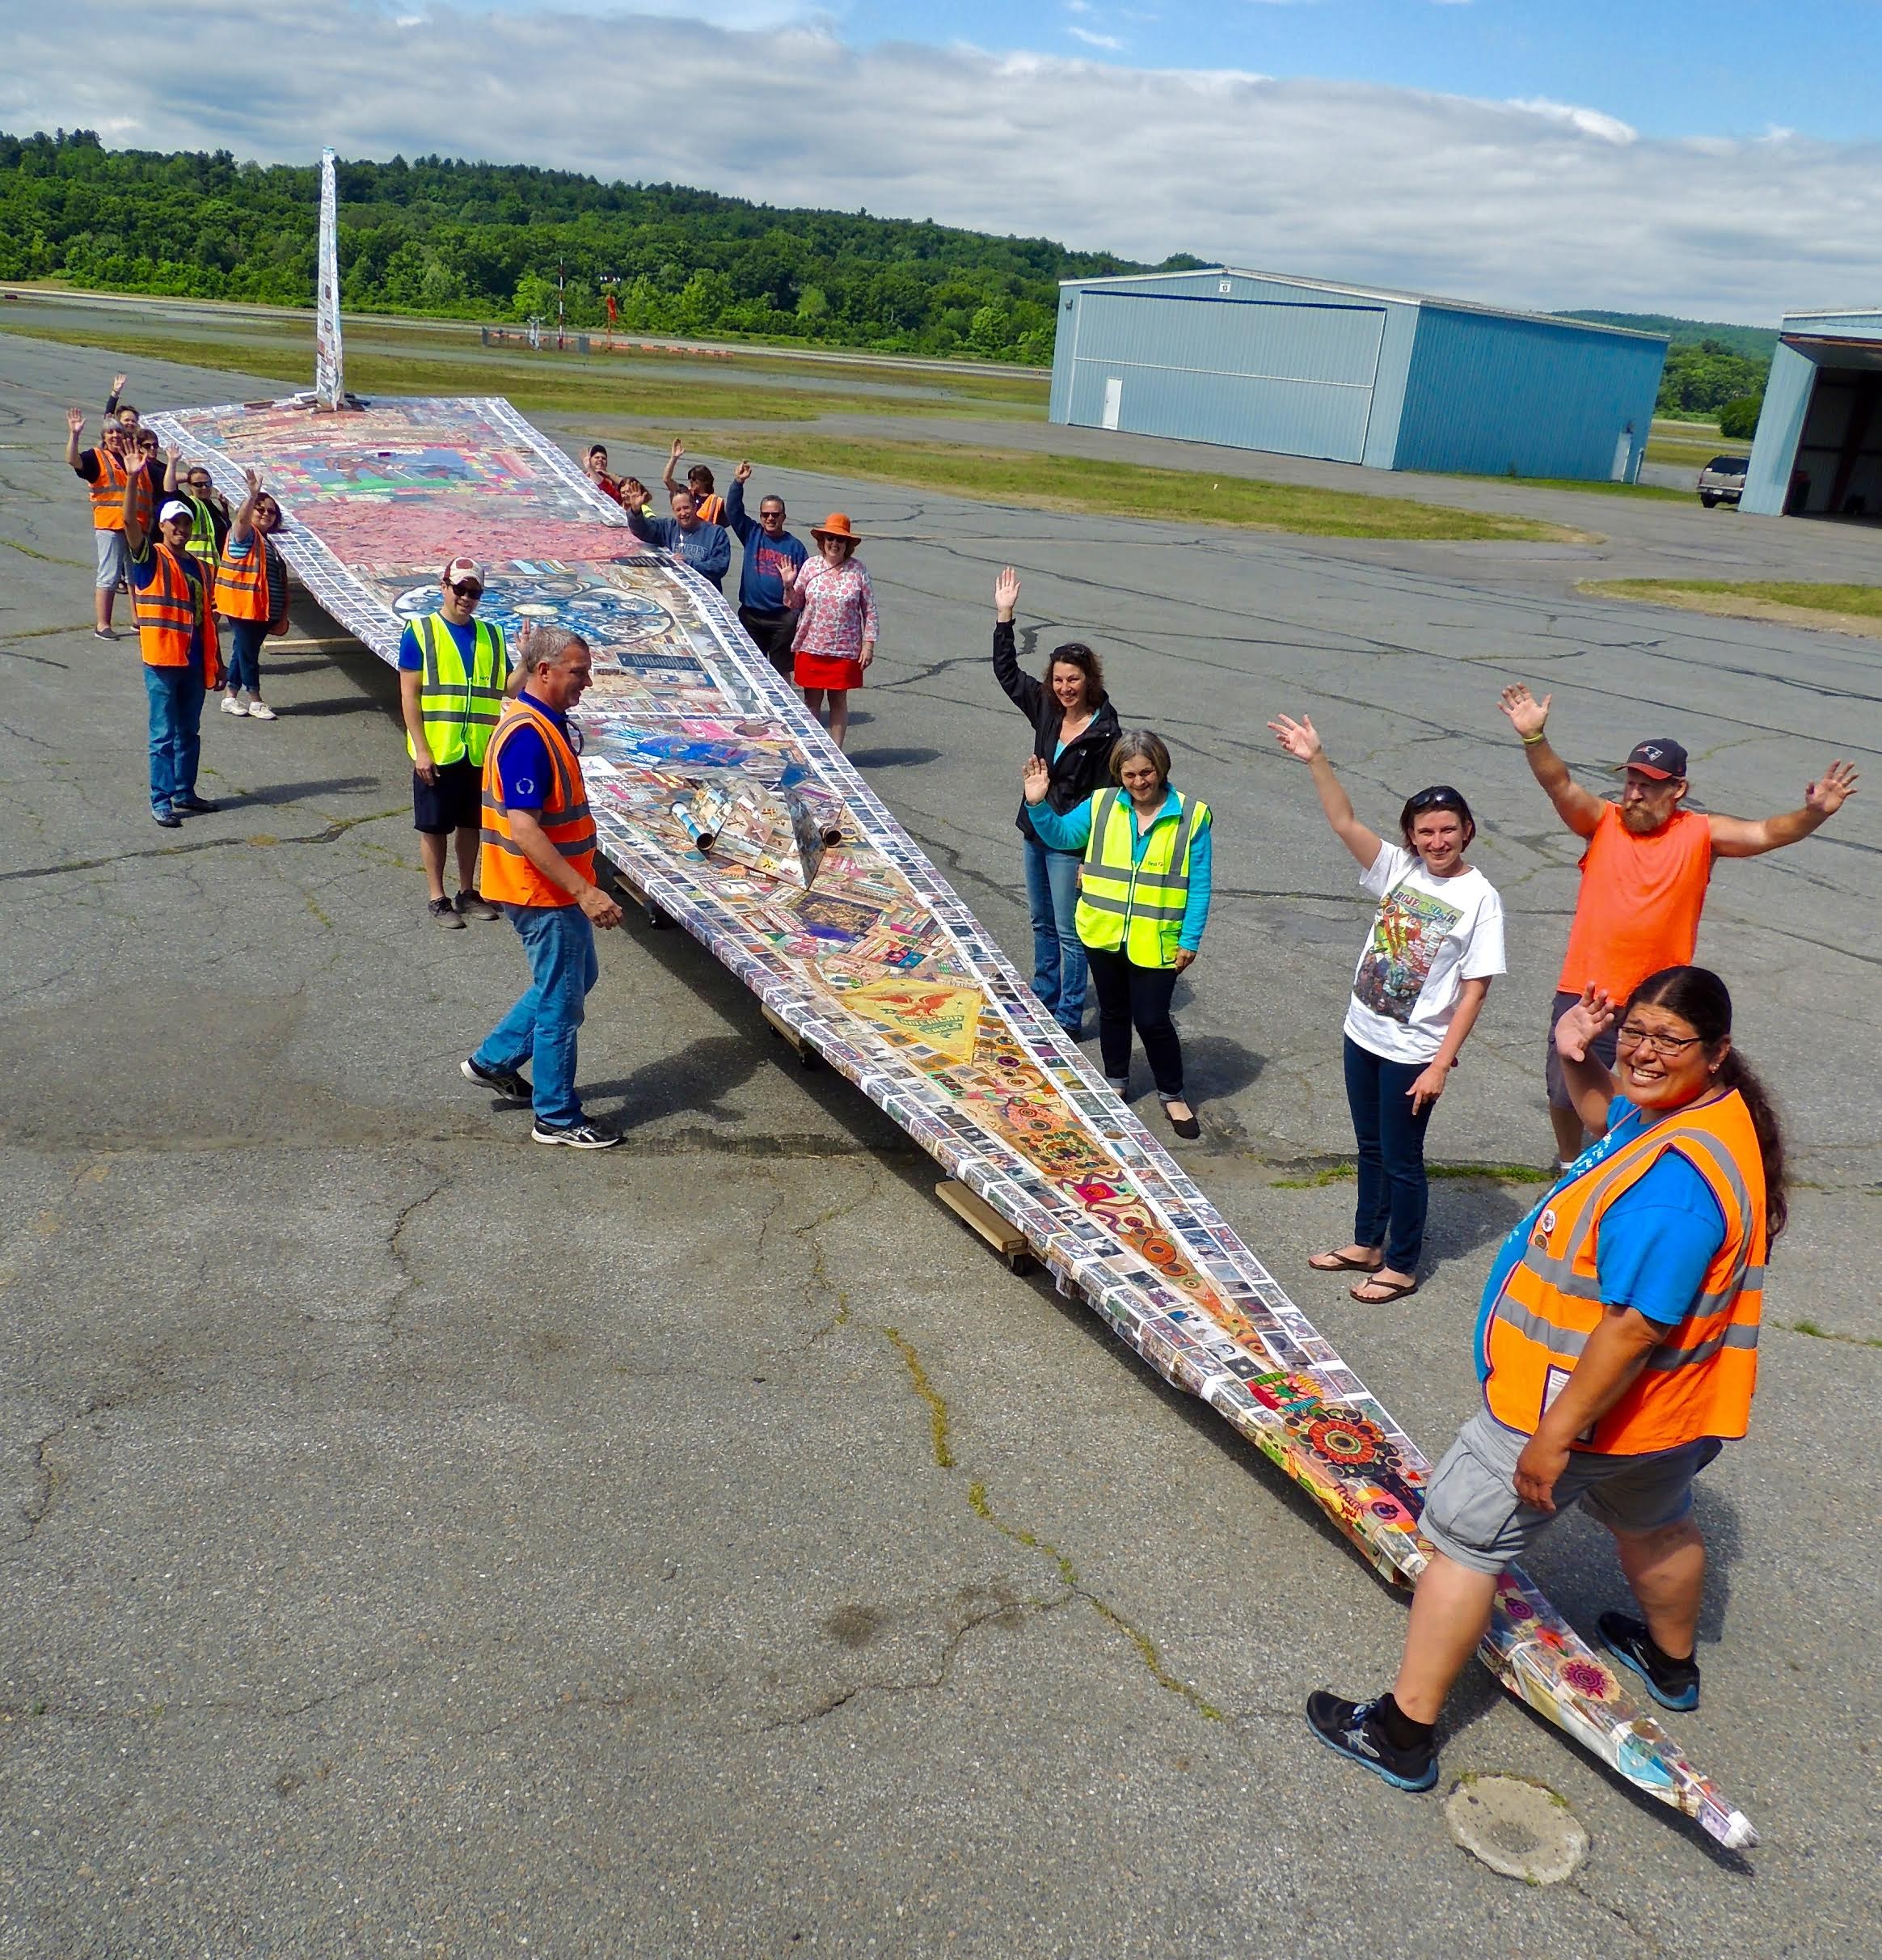 Project Soar Giant Paper Airplane Attempts a Guinness World Record